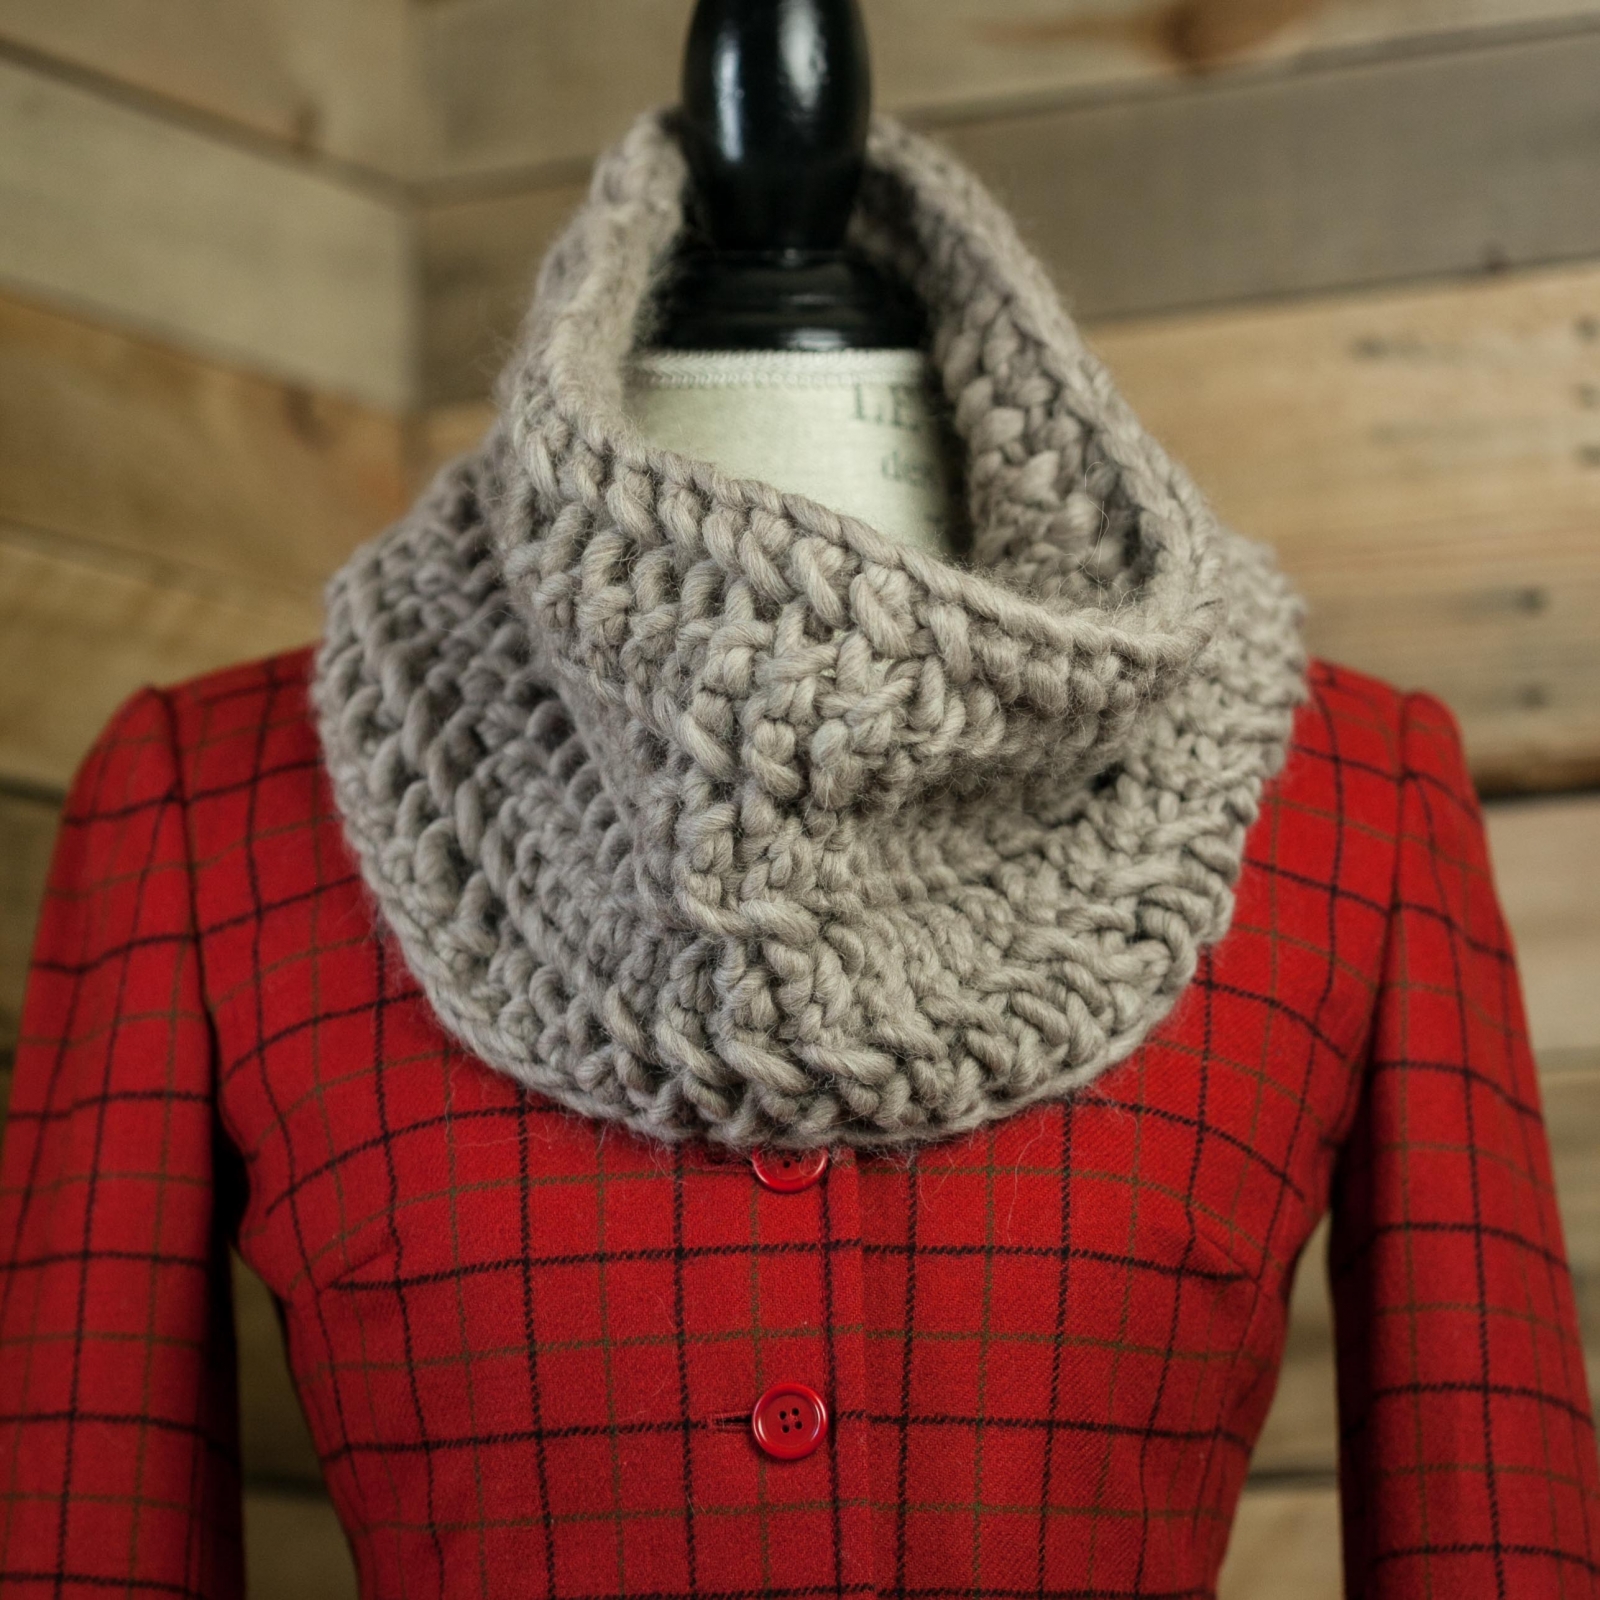 Loom Knit Cowl Pattern, Chunky Lace Cowl Pattern This